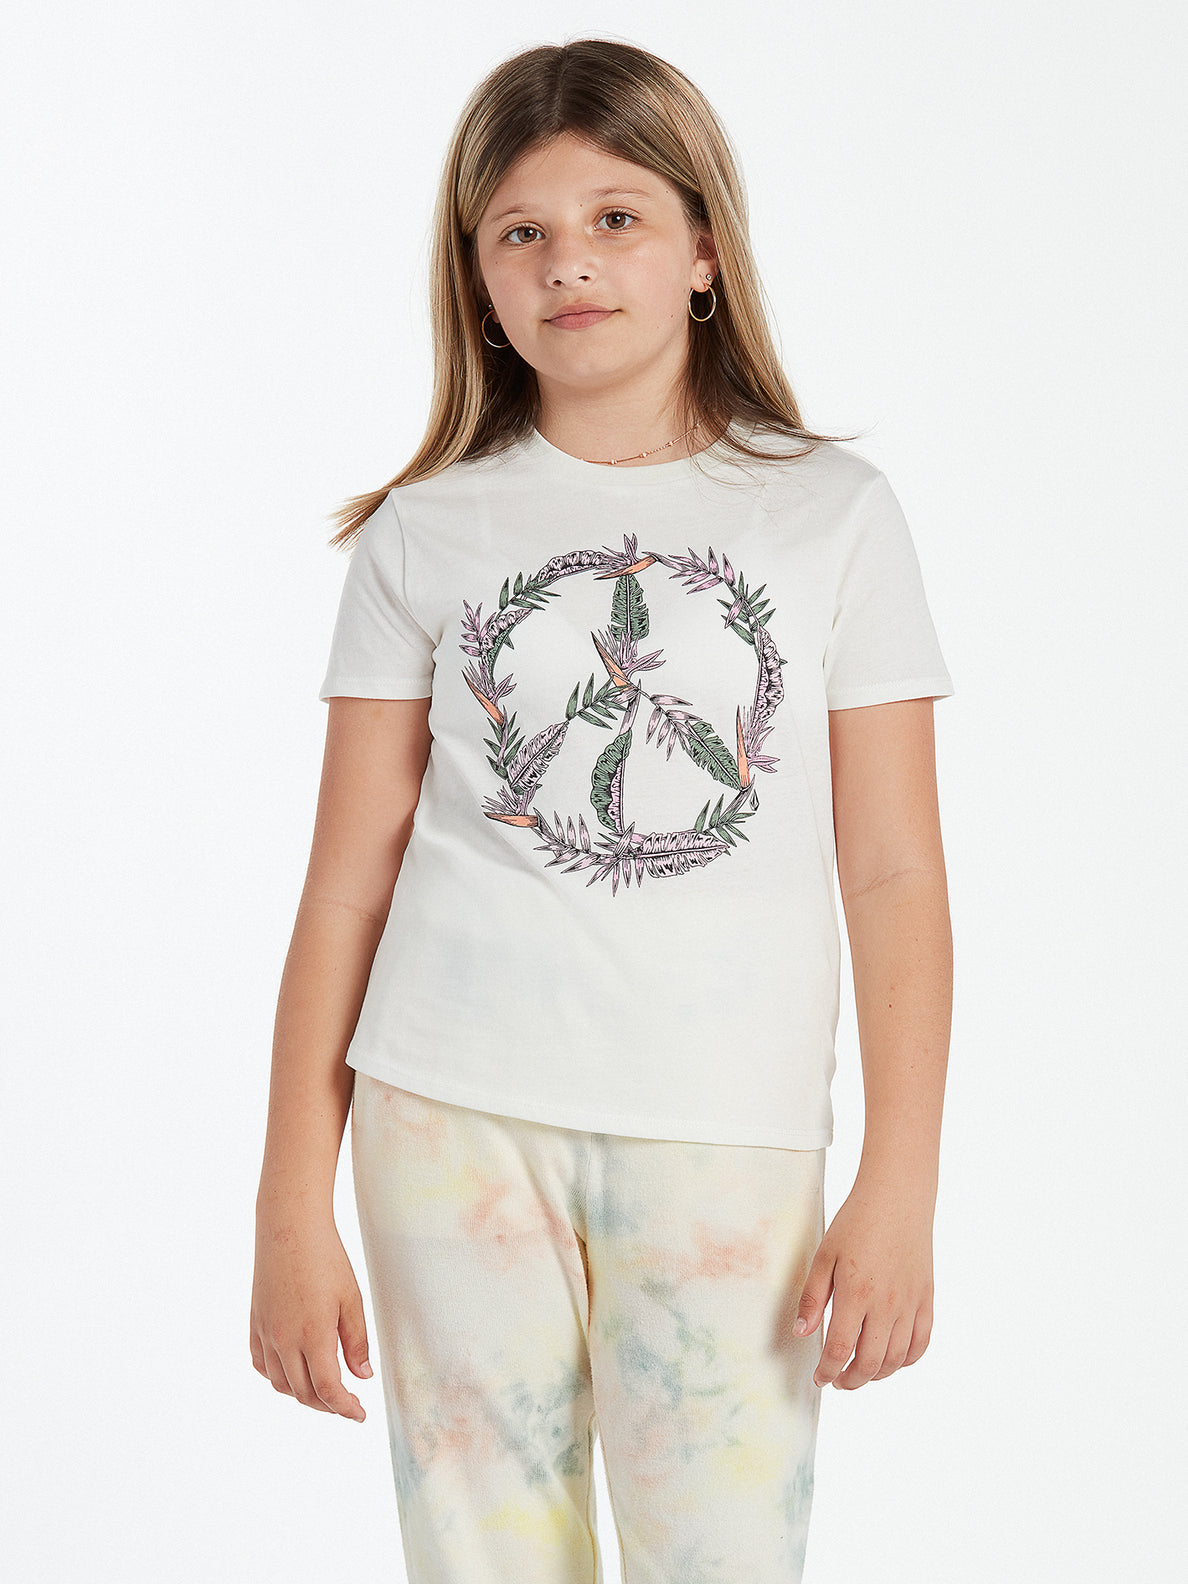 Girls Last Party Short Sleeve Tee - Star White (R3512200_SWH) [2]